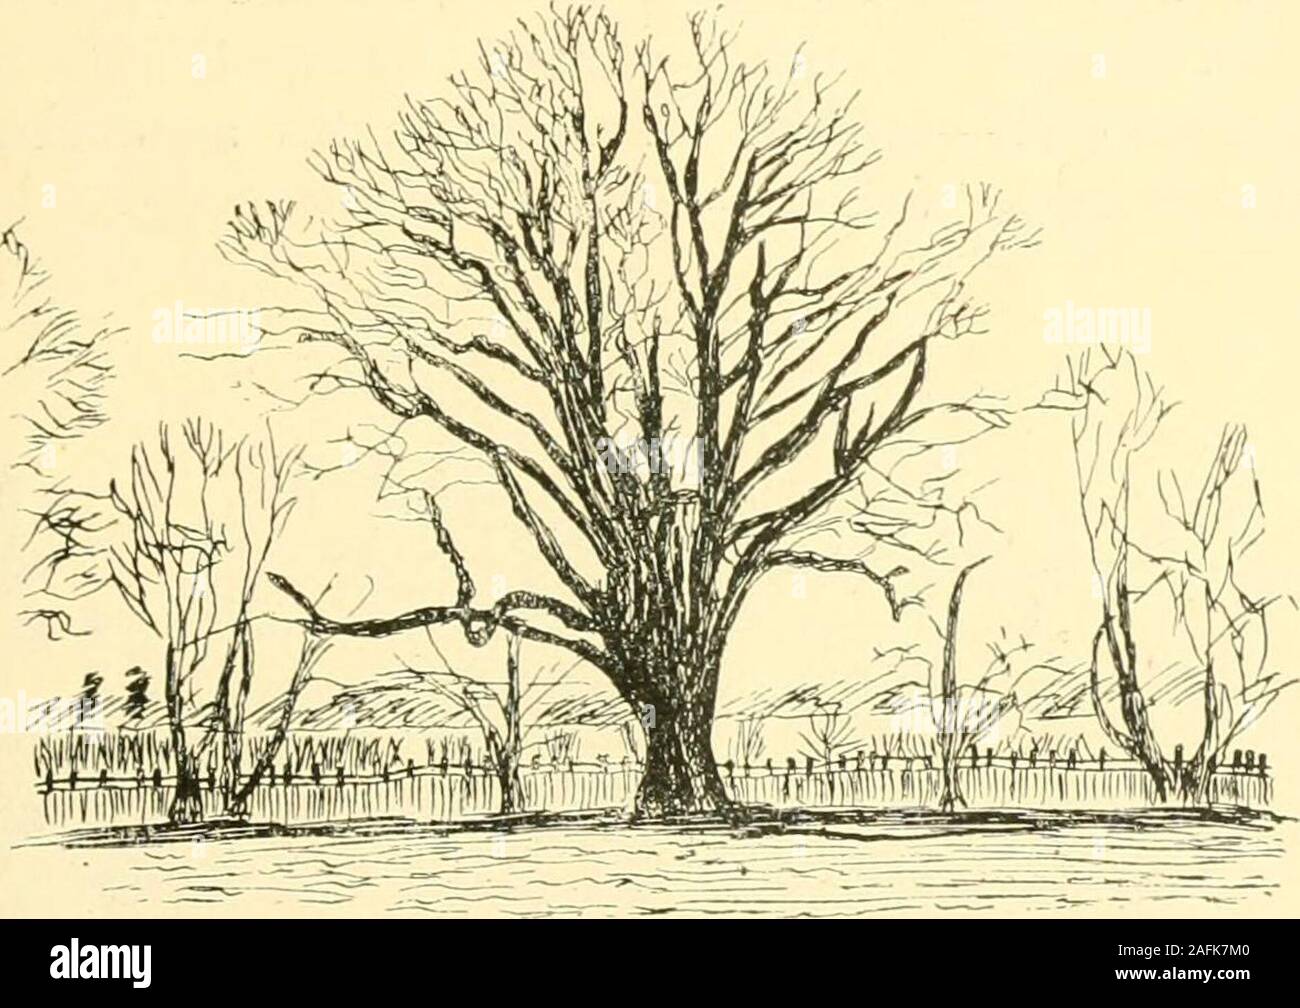 . Essex naturalist: being the journal of the Essex Field Club. 4.^ MKdt^- FiG. 25.—Oak at Mu.vdon Hall, near Maldon. THE OAK TREE IN ESSEX. HI Mundon Hall Oaks.—At Mundon Hall, near Maldon, thereis a magnificent collection of oak trees, no less than forty-nine finetrees in a field of moderate size, and in an adjoining wood there isanother, making fifty in all. A large proportion of these trees havetrunks which have grown to the respectable size of from i6 to17 feet circumference. It is quite wonderful to find so many well-grown oaks in one small enclosure. The Hall, though modern, nodoubt repl Stock Photo